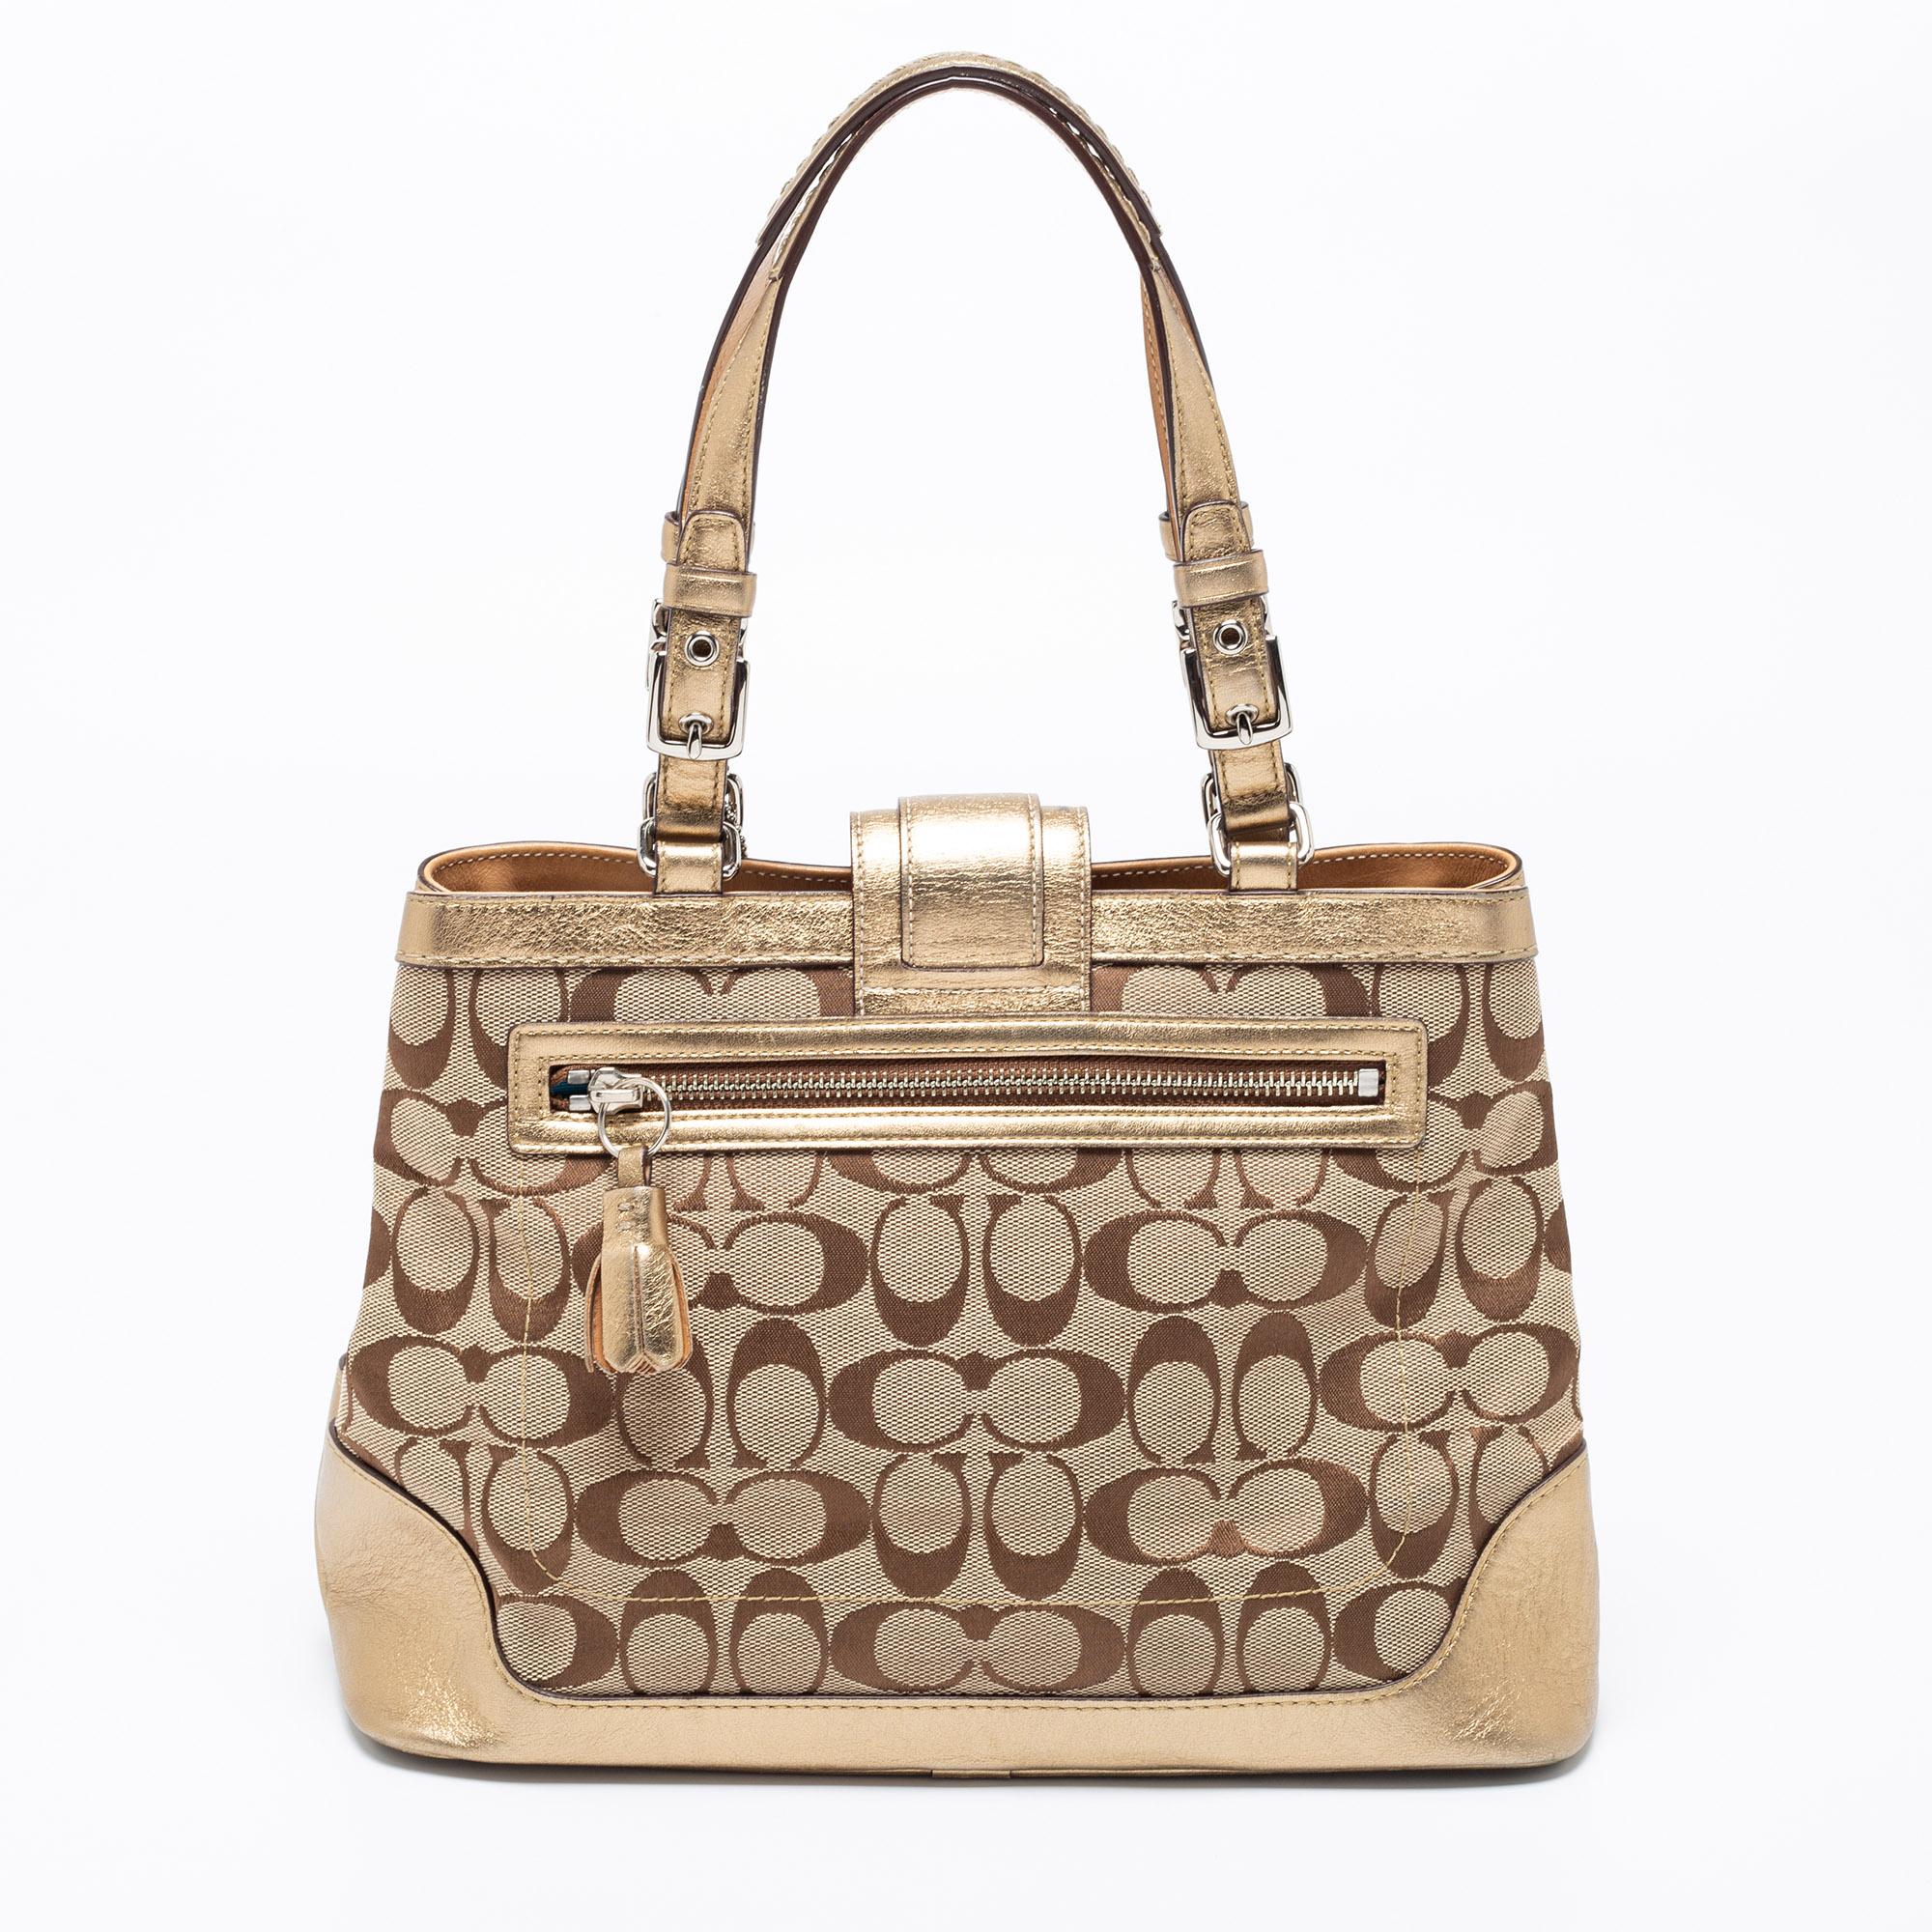 This stylish tote comes from the House of Coach. It is crafted from metallic-gold and silver Signature canvas and leather and is decorated with silver-toned hardware. It features two handles and a fabric-lined interior. This creation is ideal for